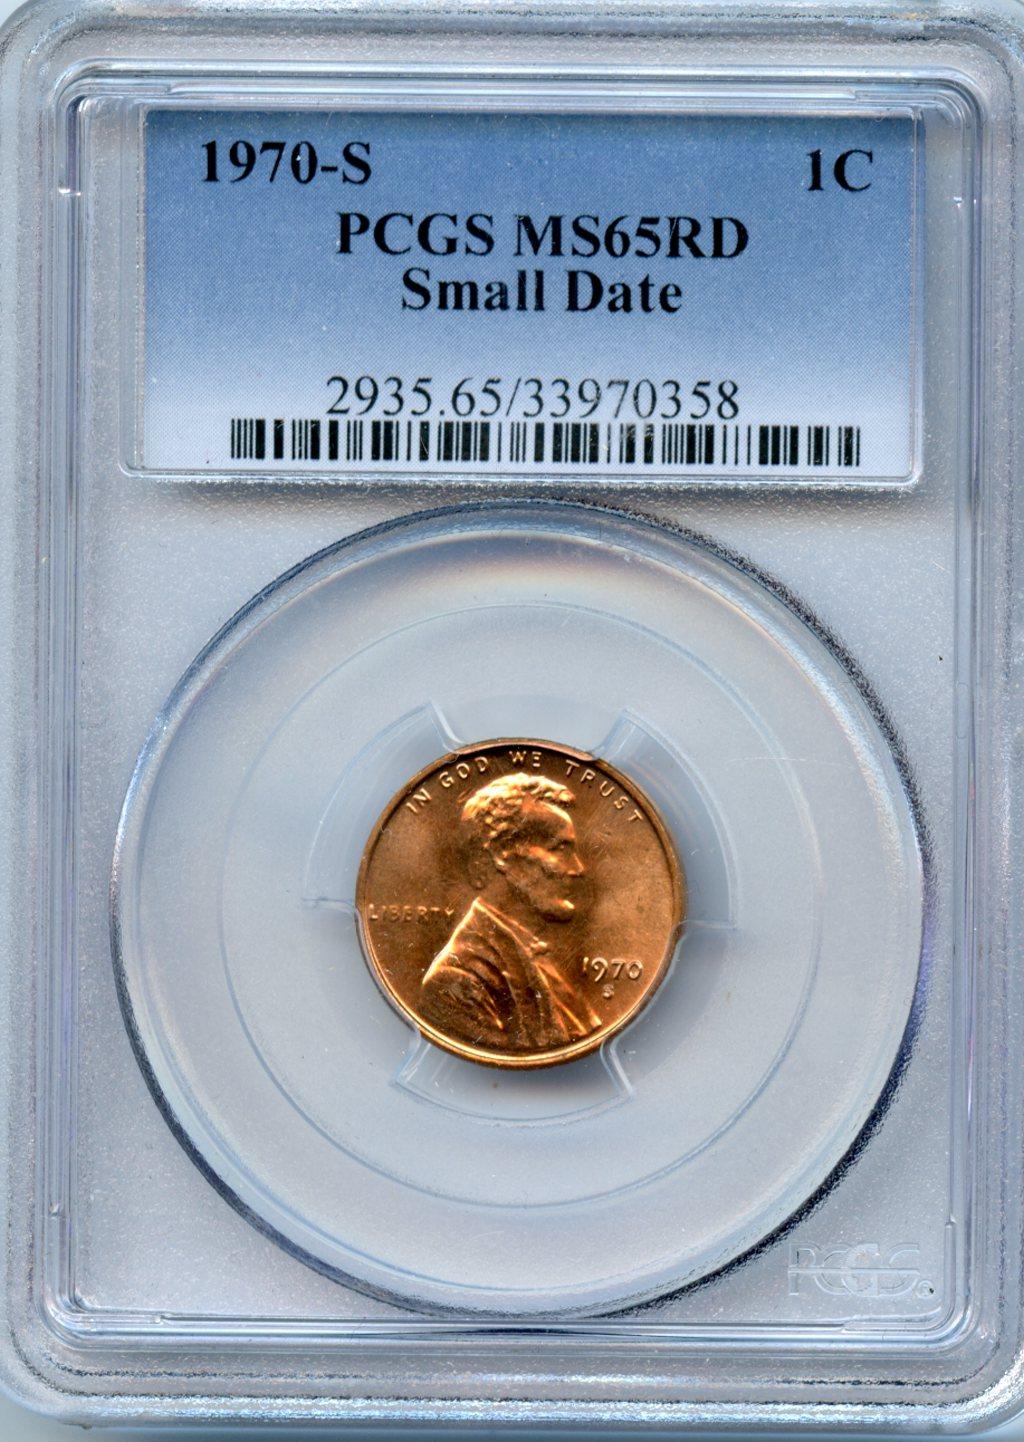 1970-S Lincoln Memorial Cent Small Date in PCGS MS 65 RD